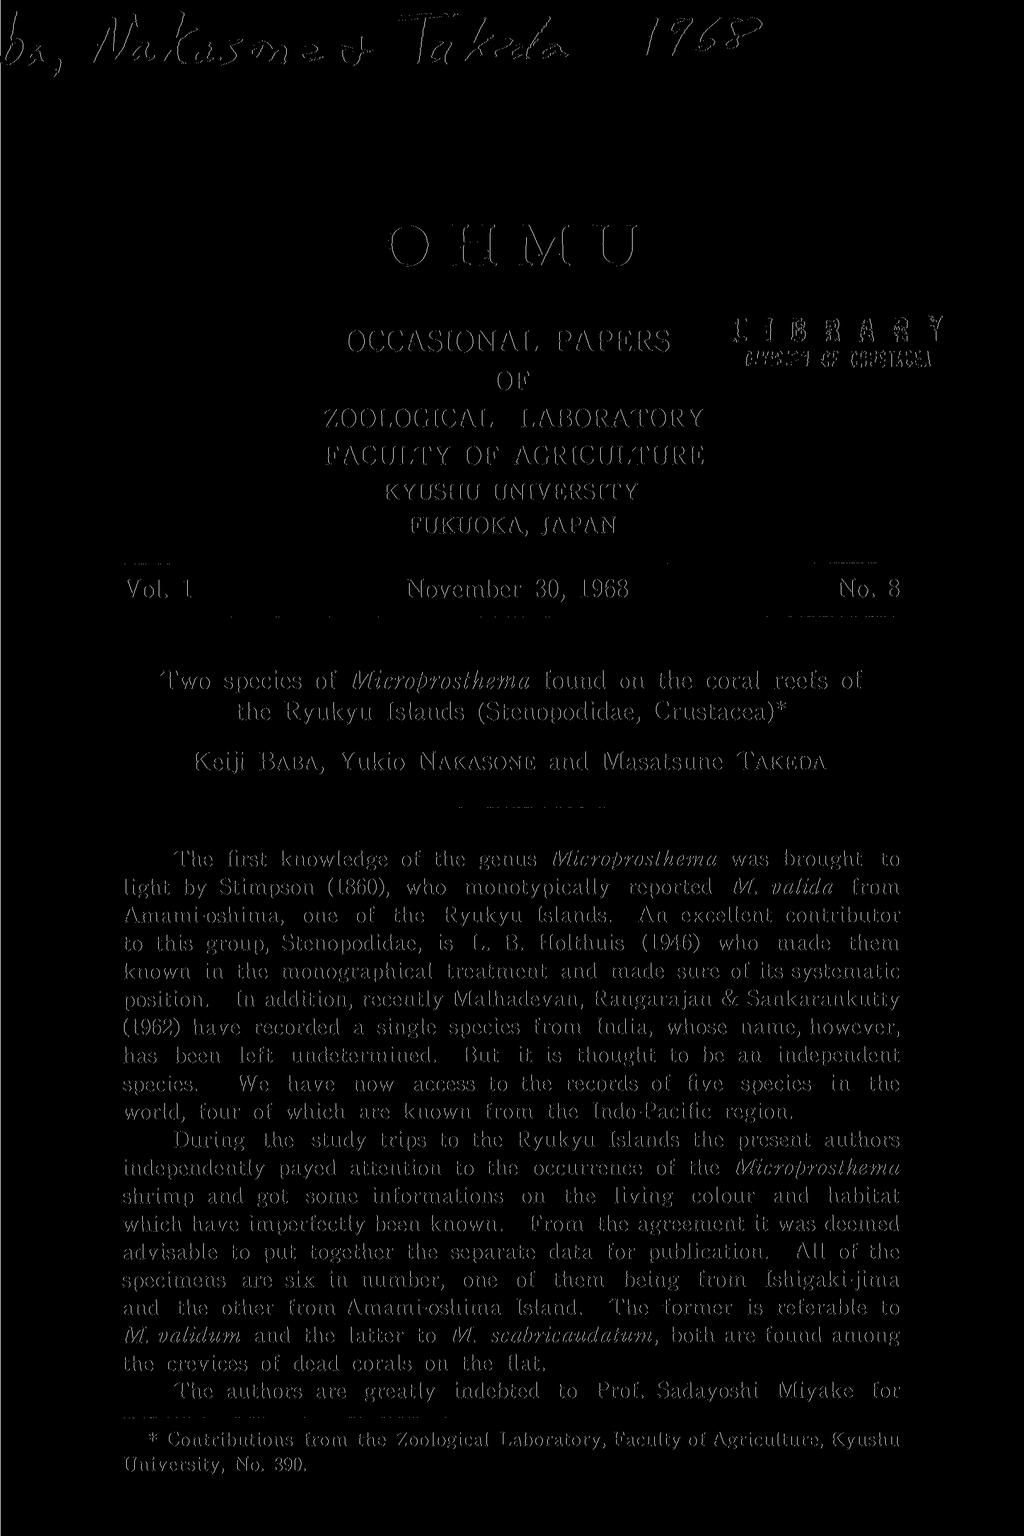 Mt e ^ T«hJc< / OHMU OCCASIONAL PAPERS j* A? OF ZOOLOGICAL LABORATORY FACULTY OF AGRICULTURE KYUSHU UNIVERSITY FUKUOKA, JAPAN Vol. 1 November 30, 1968 No.